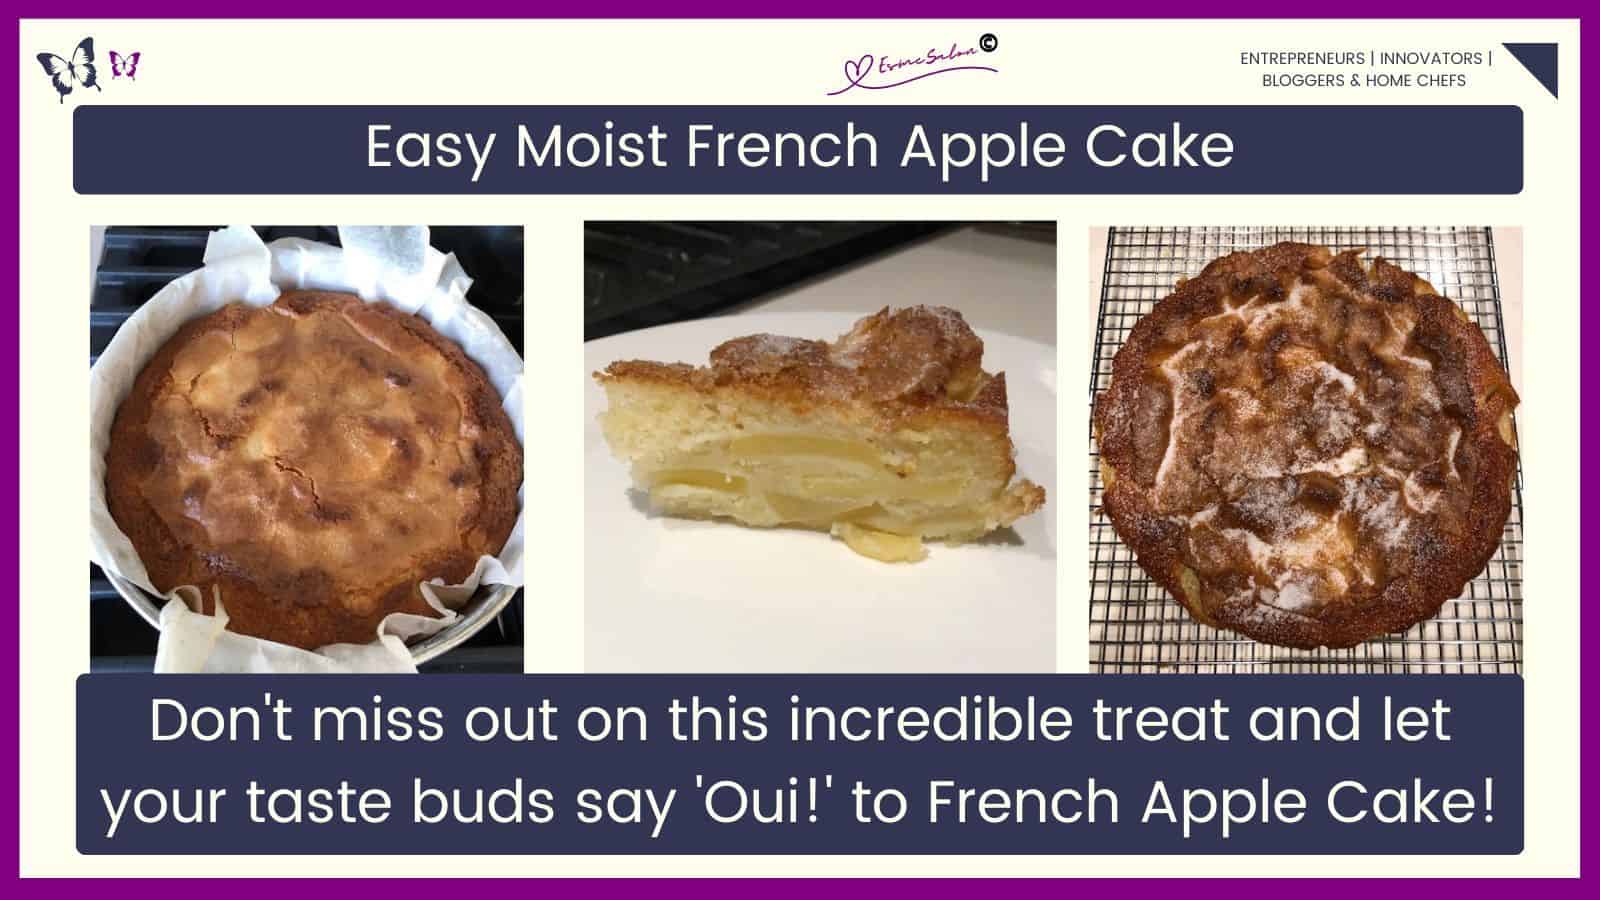 an image of a fully baked French Apple Cake with a sugar powder dusting